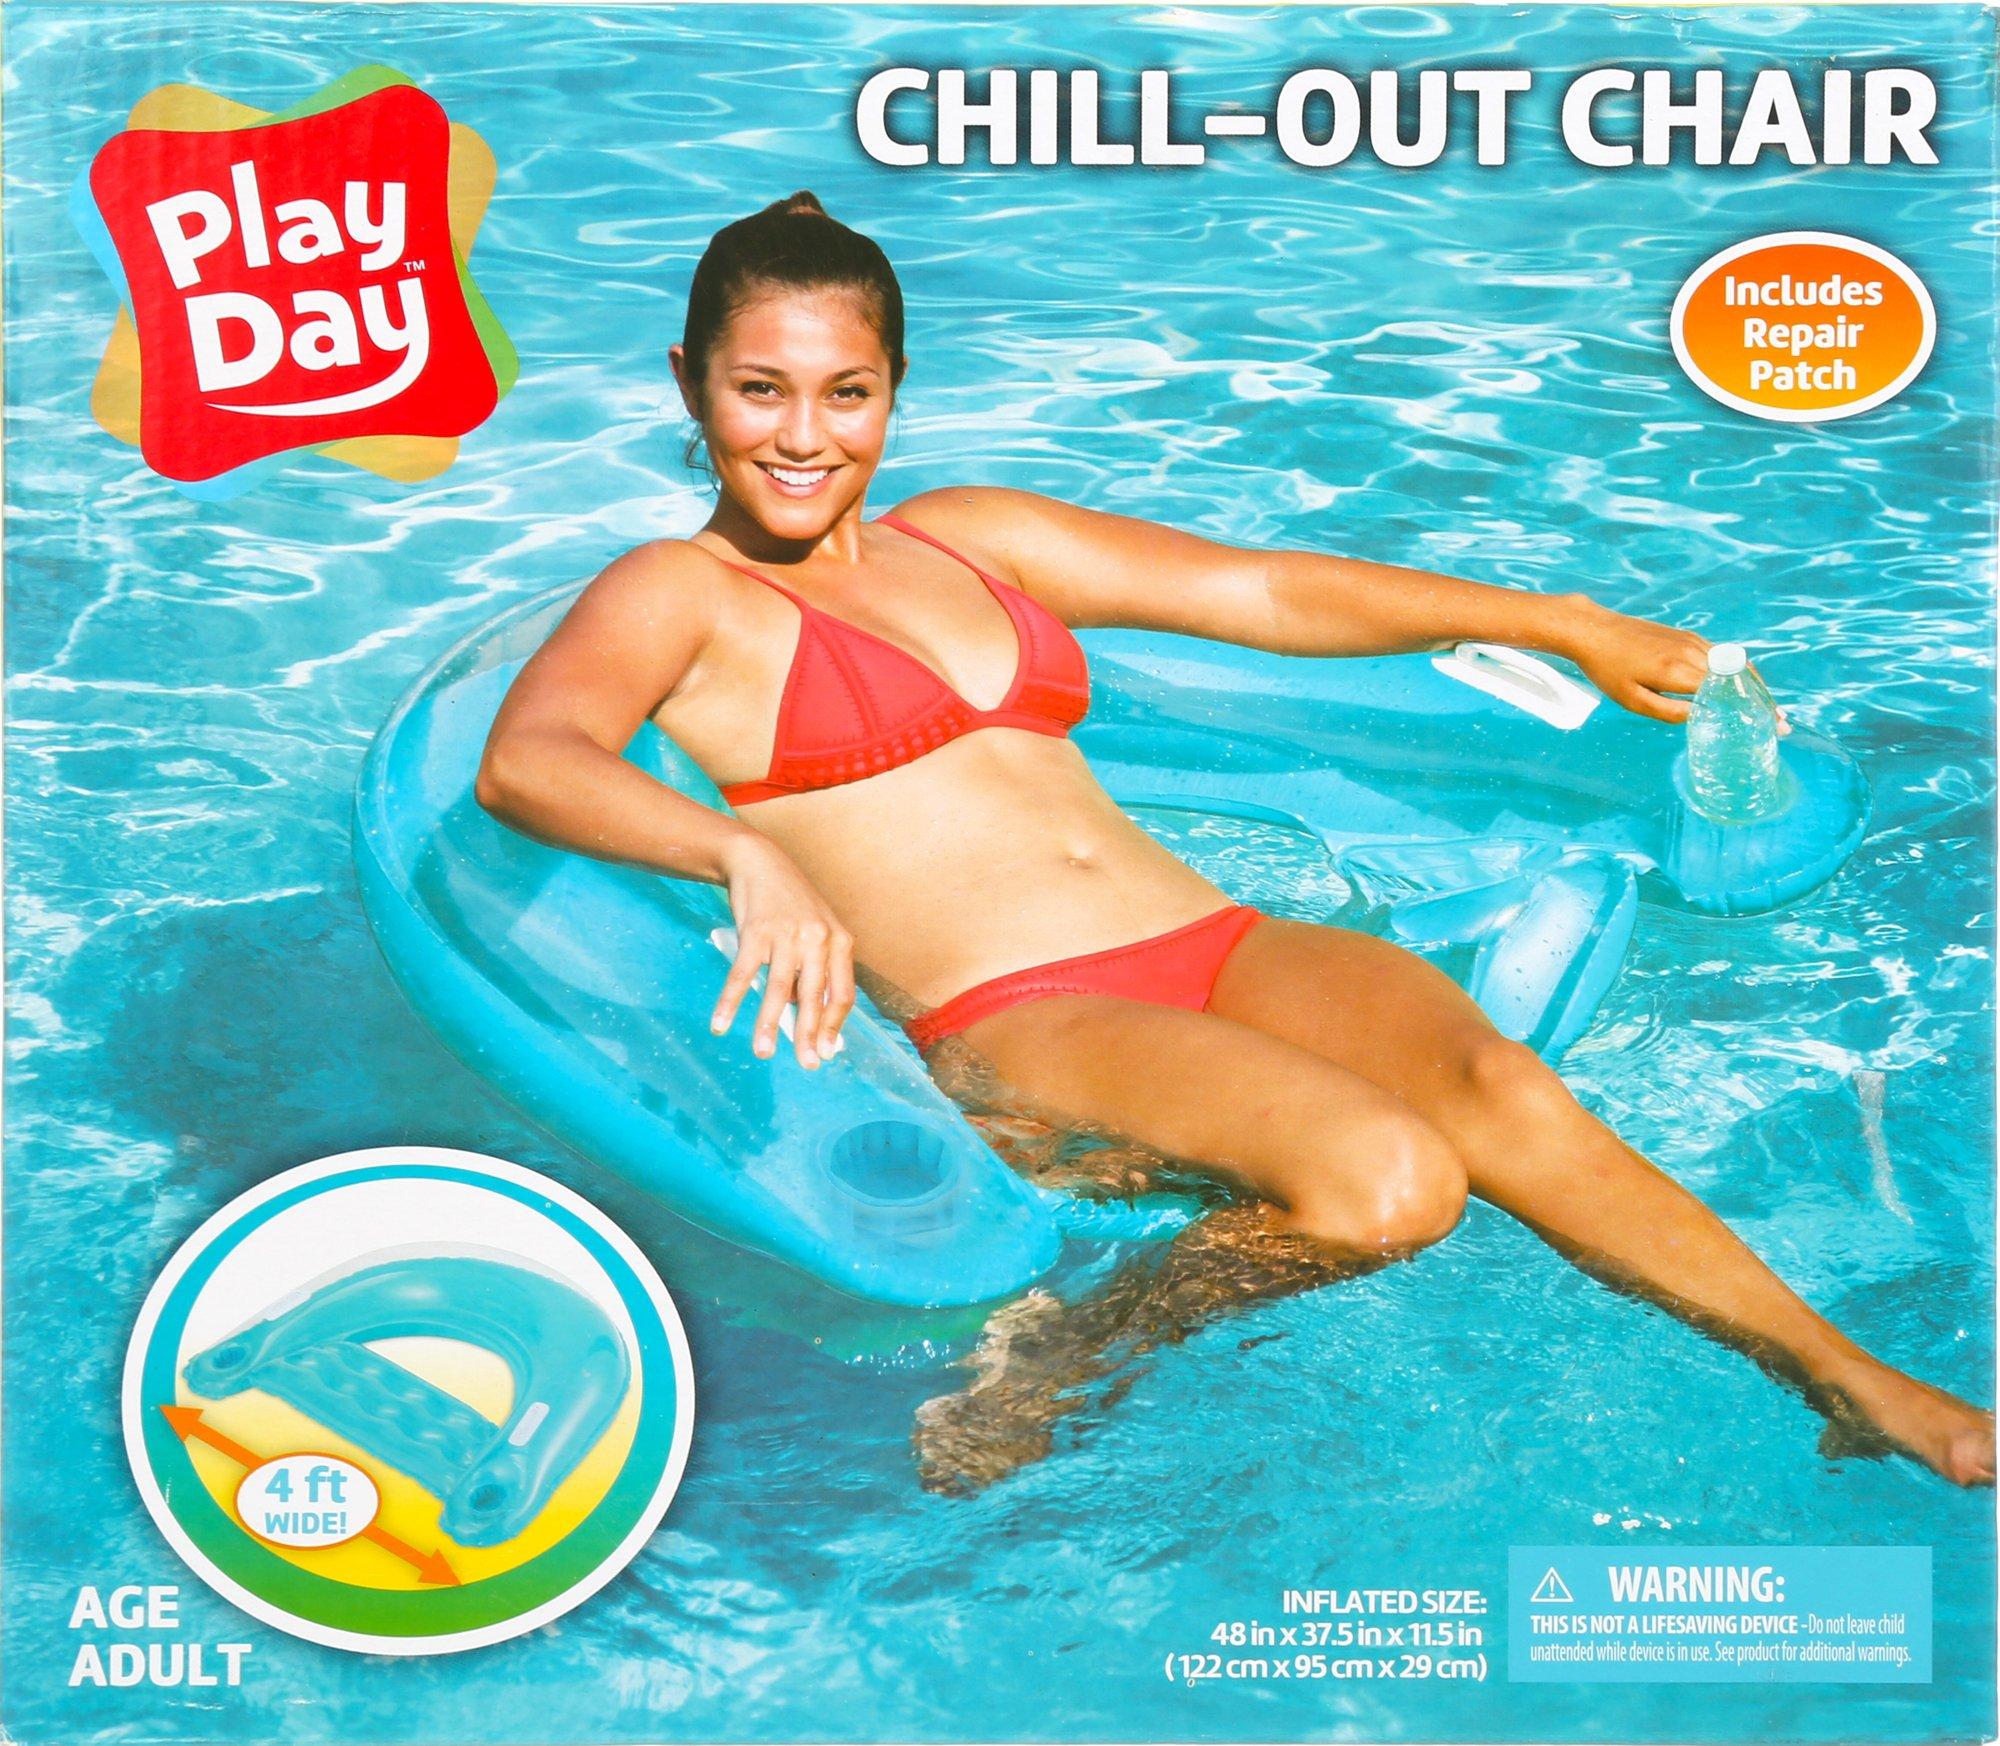 Kids Chill-Out Pool Chair